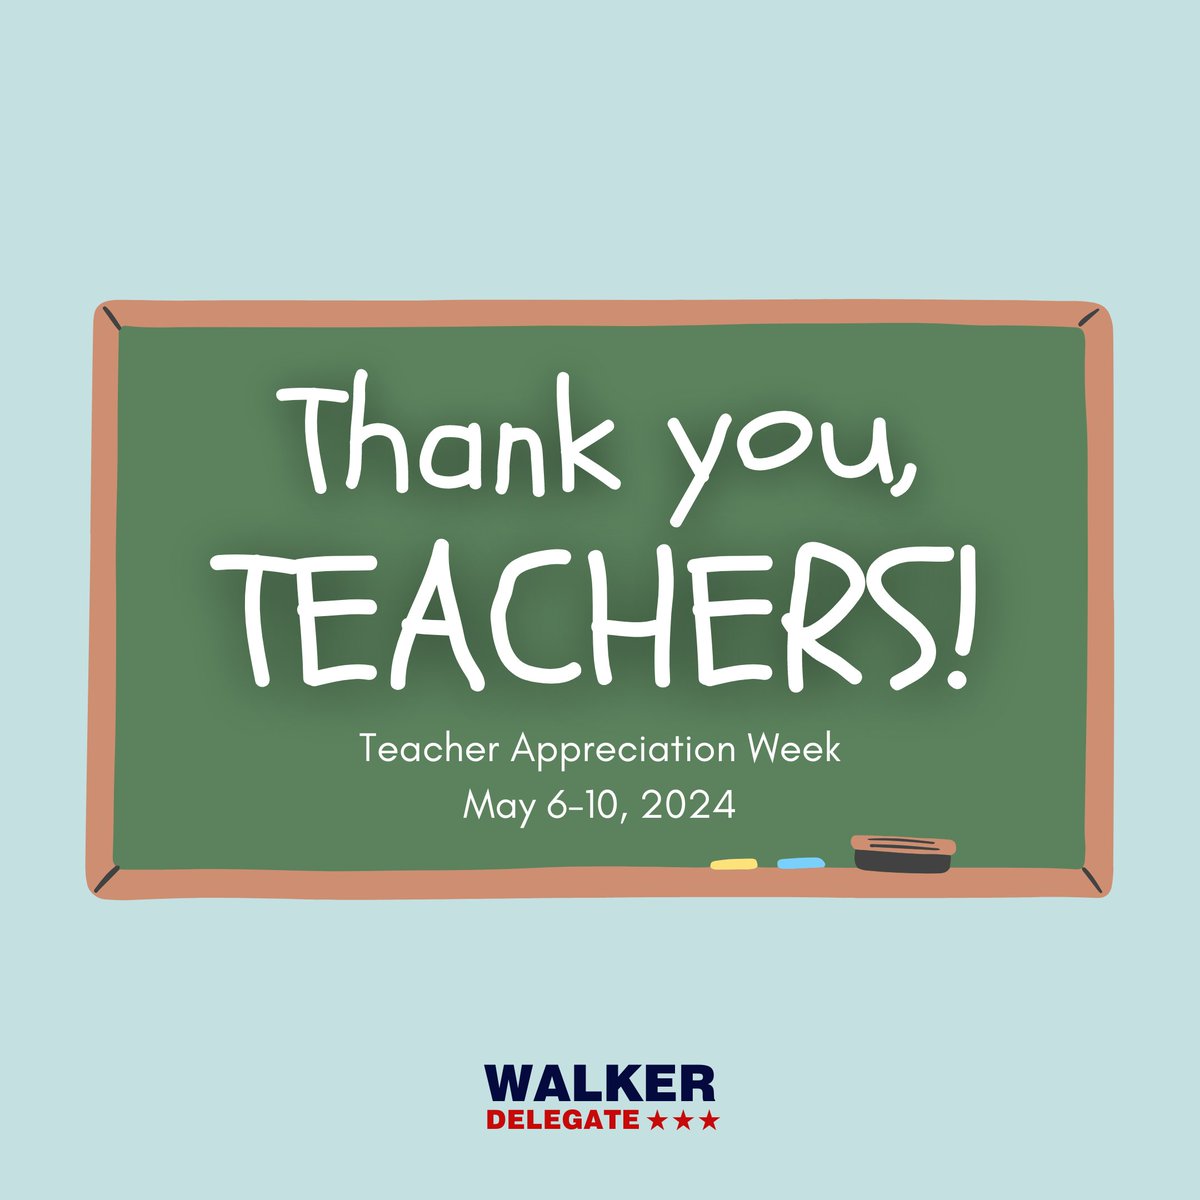 The success of our children depends on great teachers. On this #TeacherAppreciationWeek, I want to thank all the incredible educators in the 52nd District for the lasting impact they have on our future leaders. Thank you, teachers, for all you do! 🍎📚